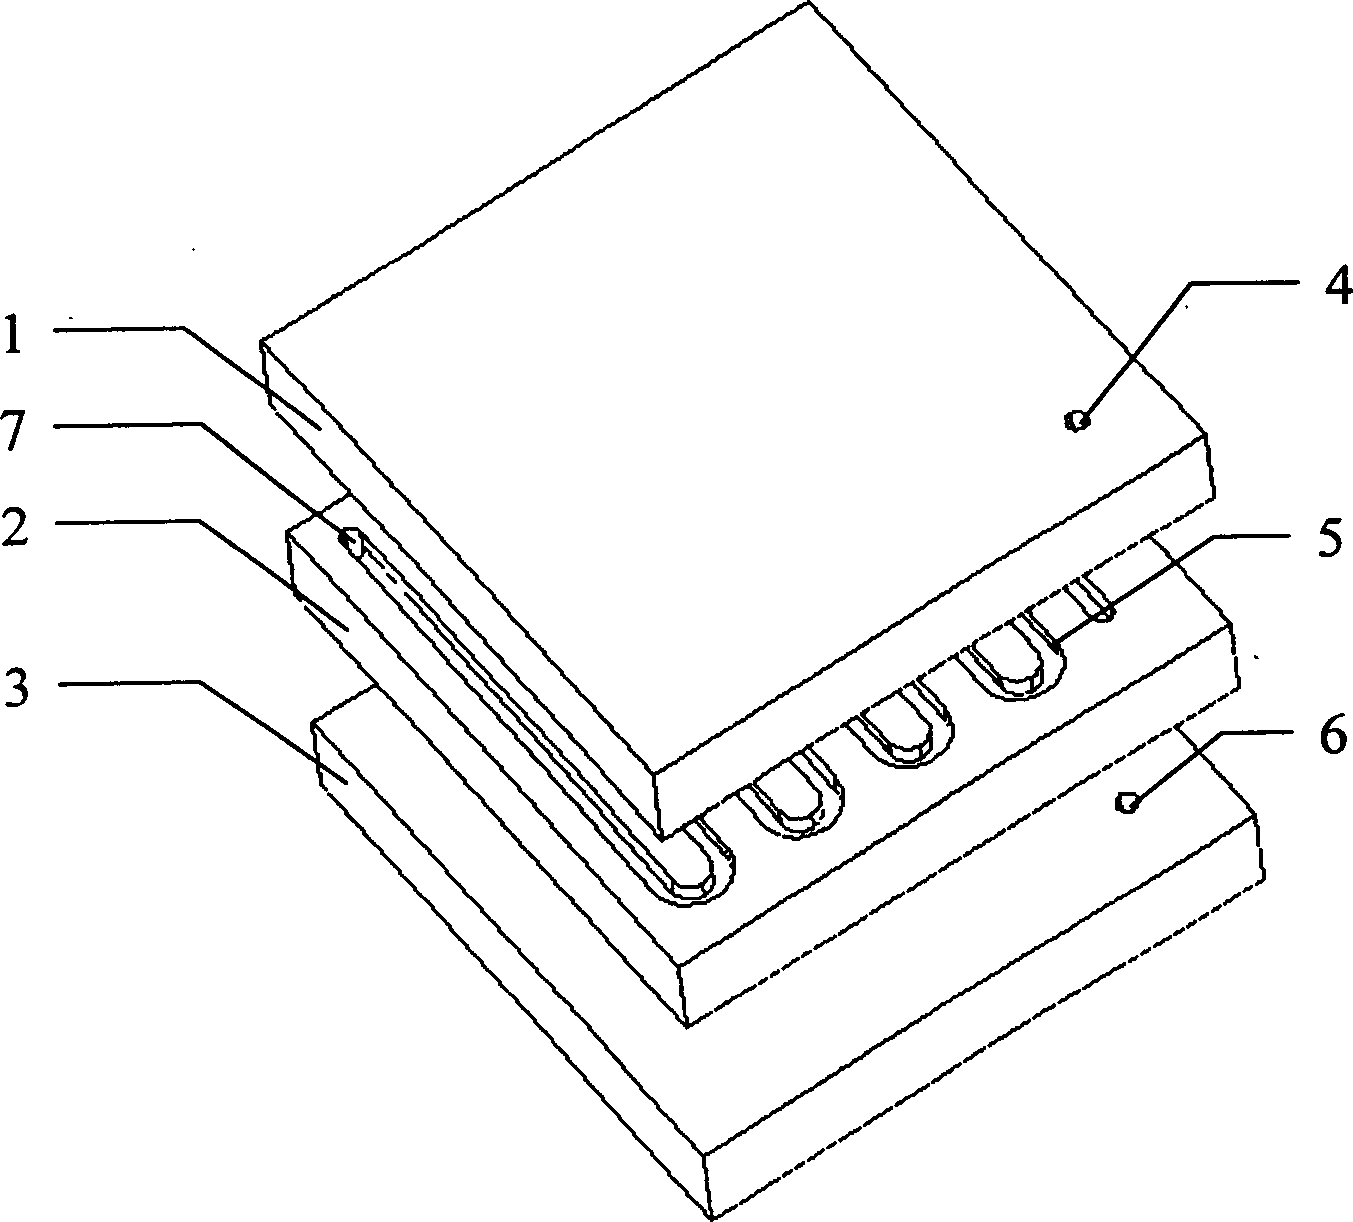 Miniature gas chromatographic column, gas chromatographic system and method for analysizing composition in sample